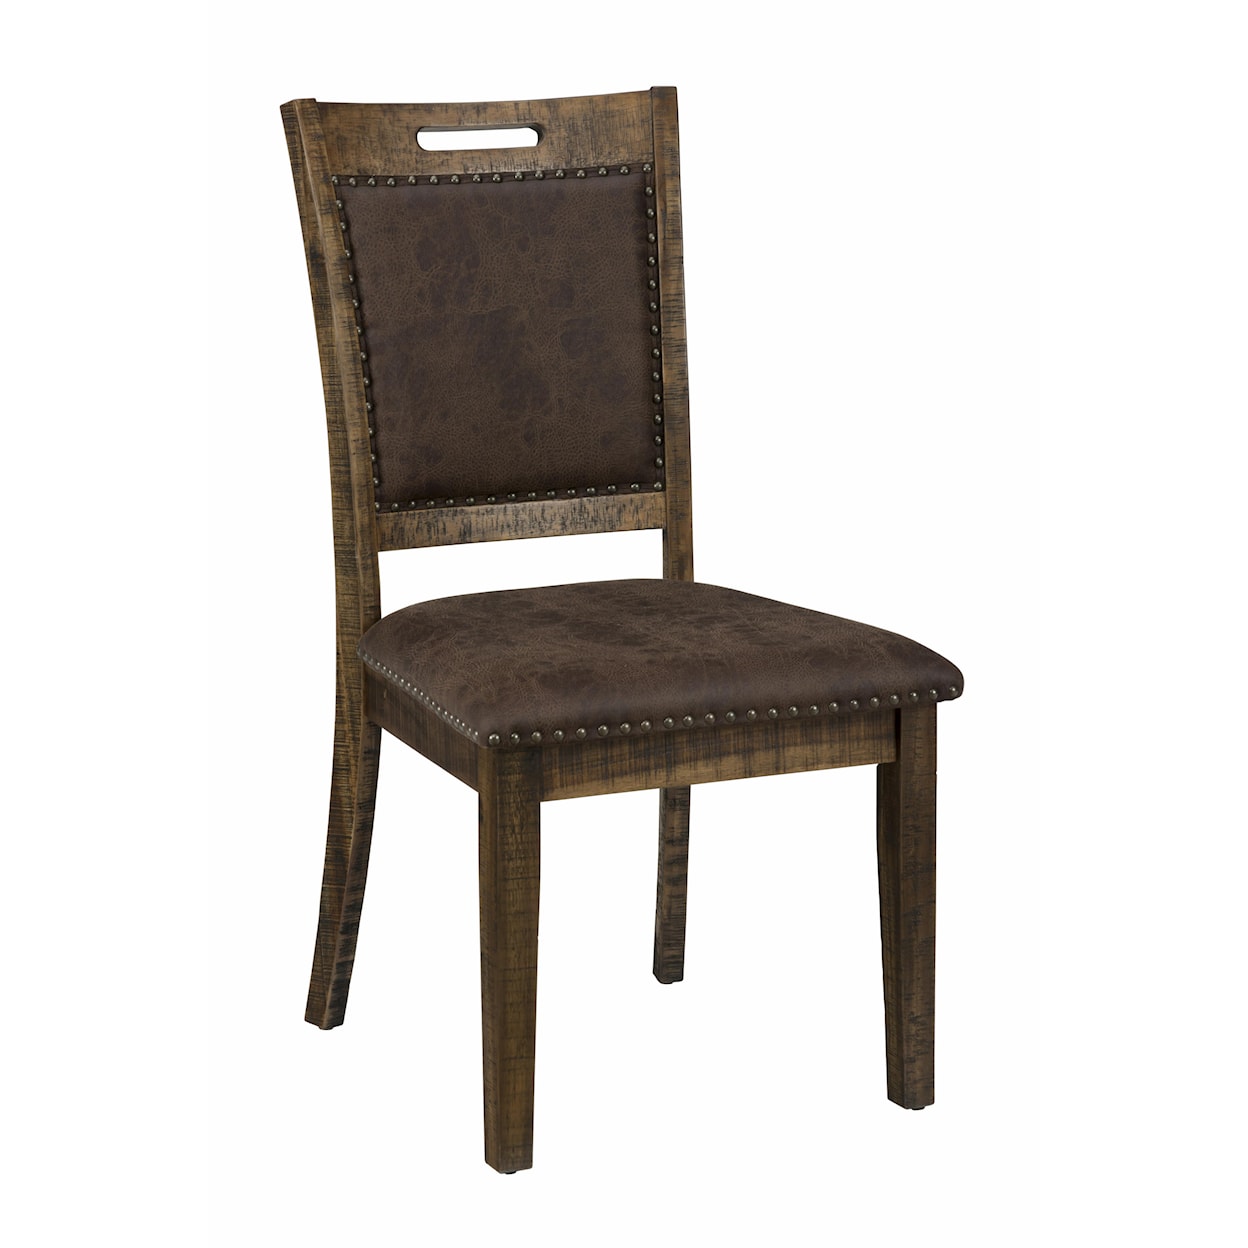 Jofran Cannon Valley Upholstered Back Dining Chair